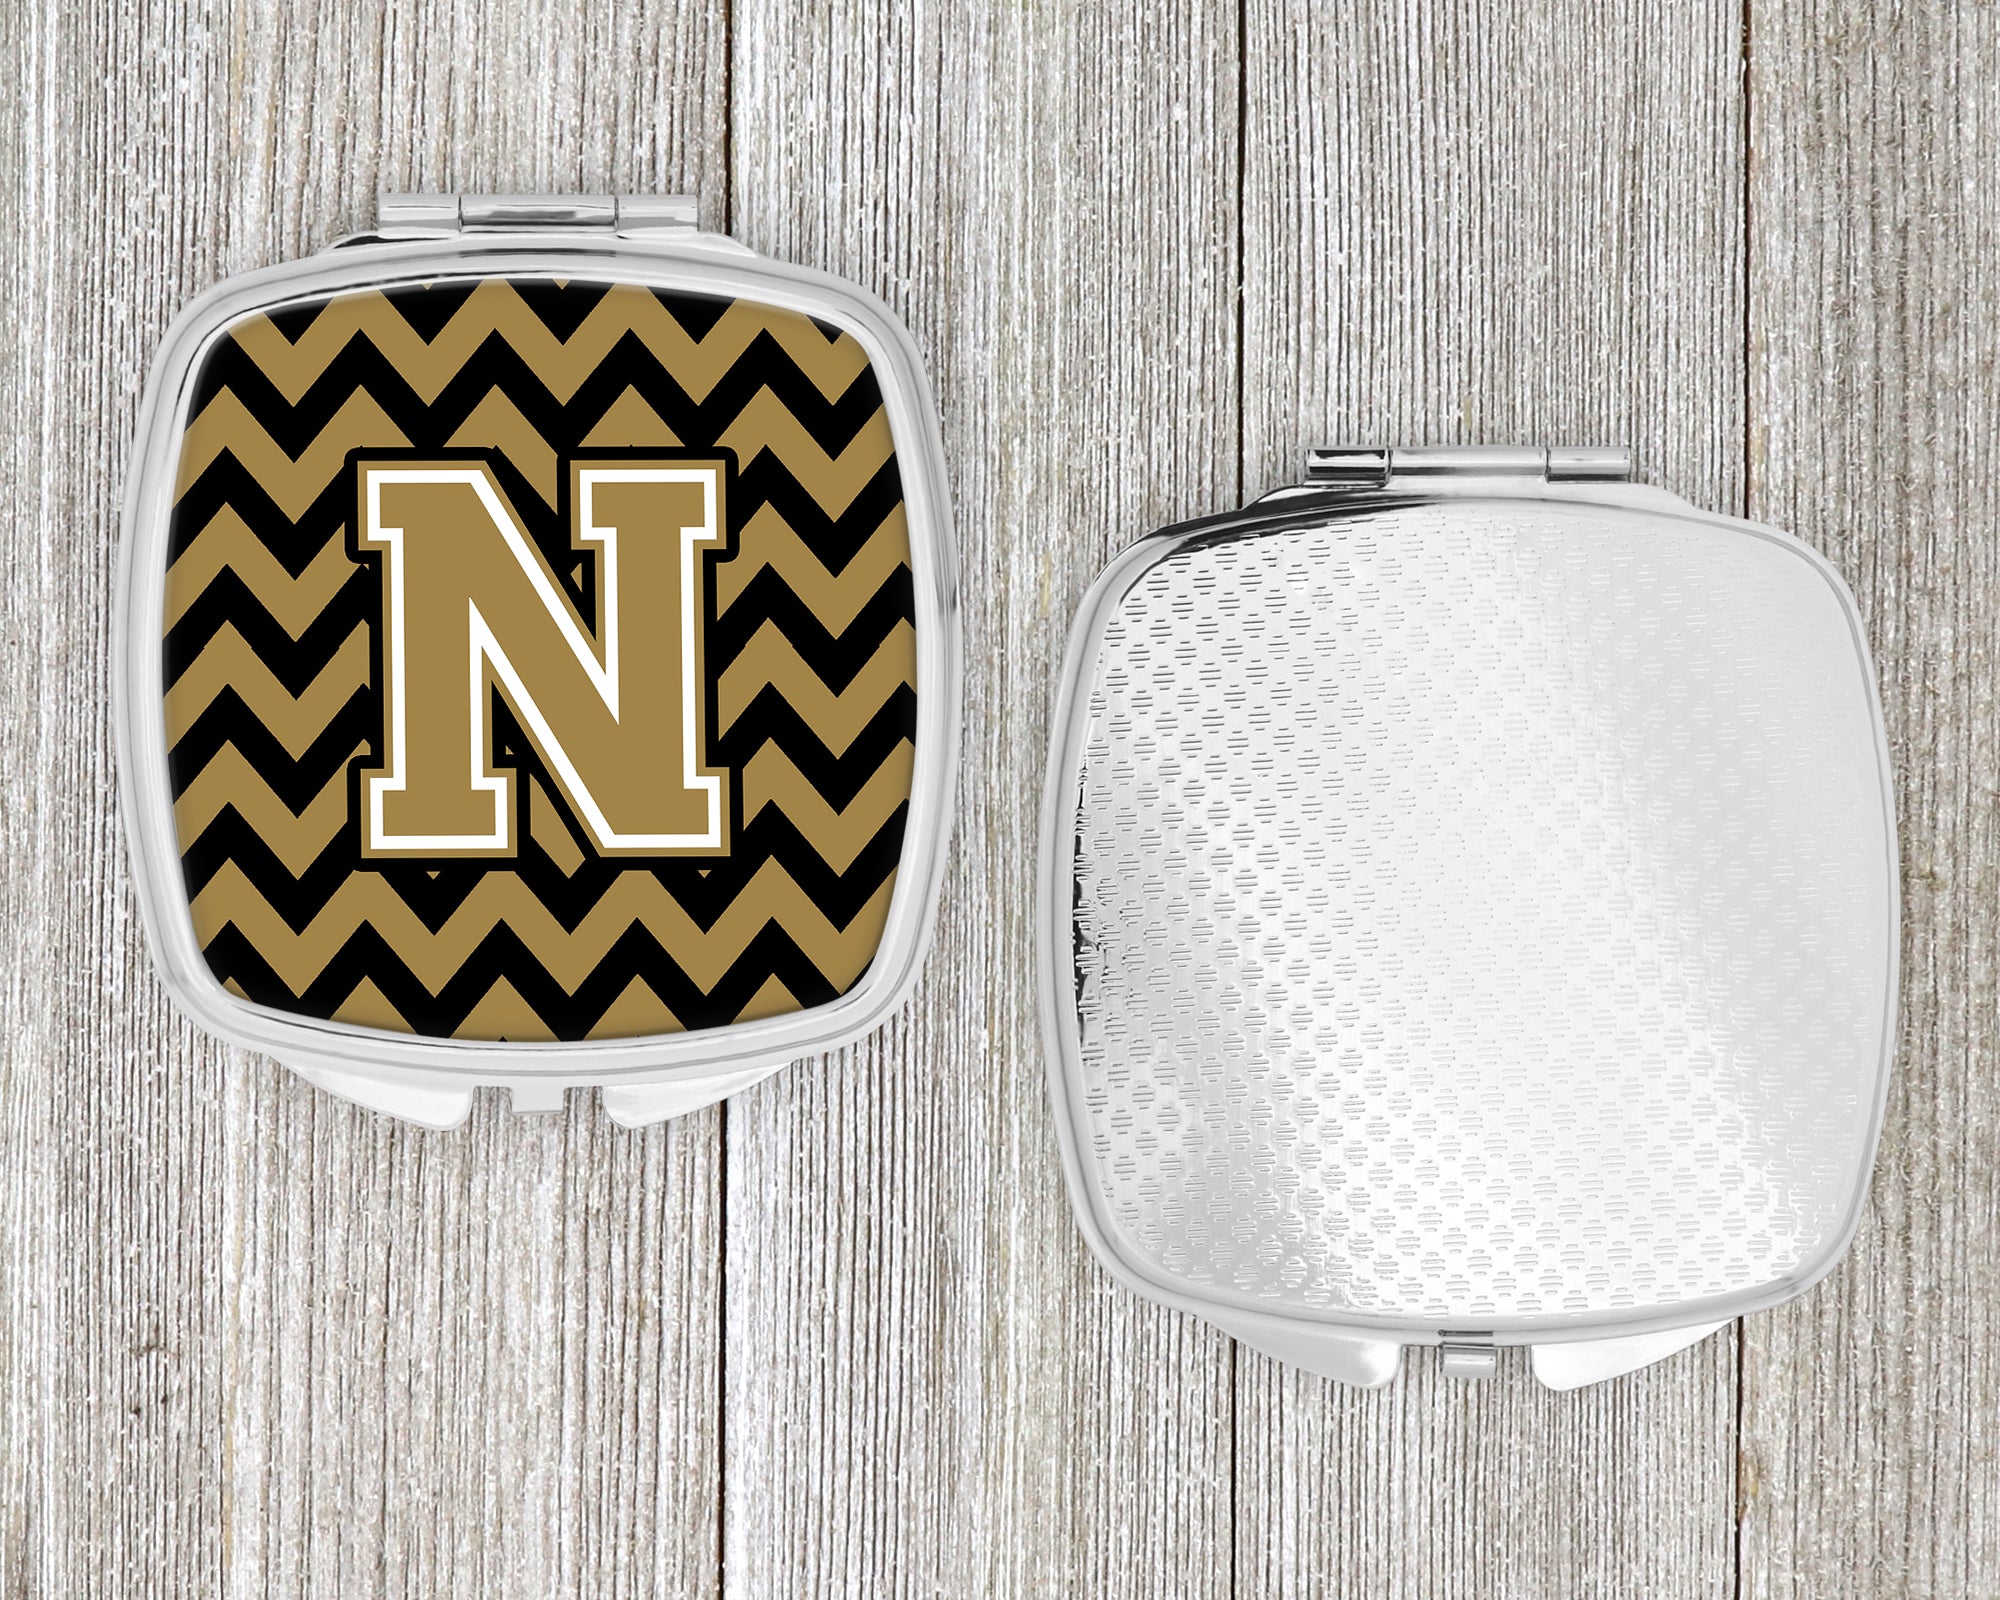 Letter N Chevron Black and Gold  Compact Mirror CJ1050-NSCM